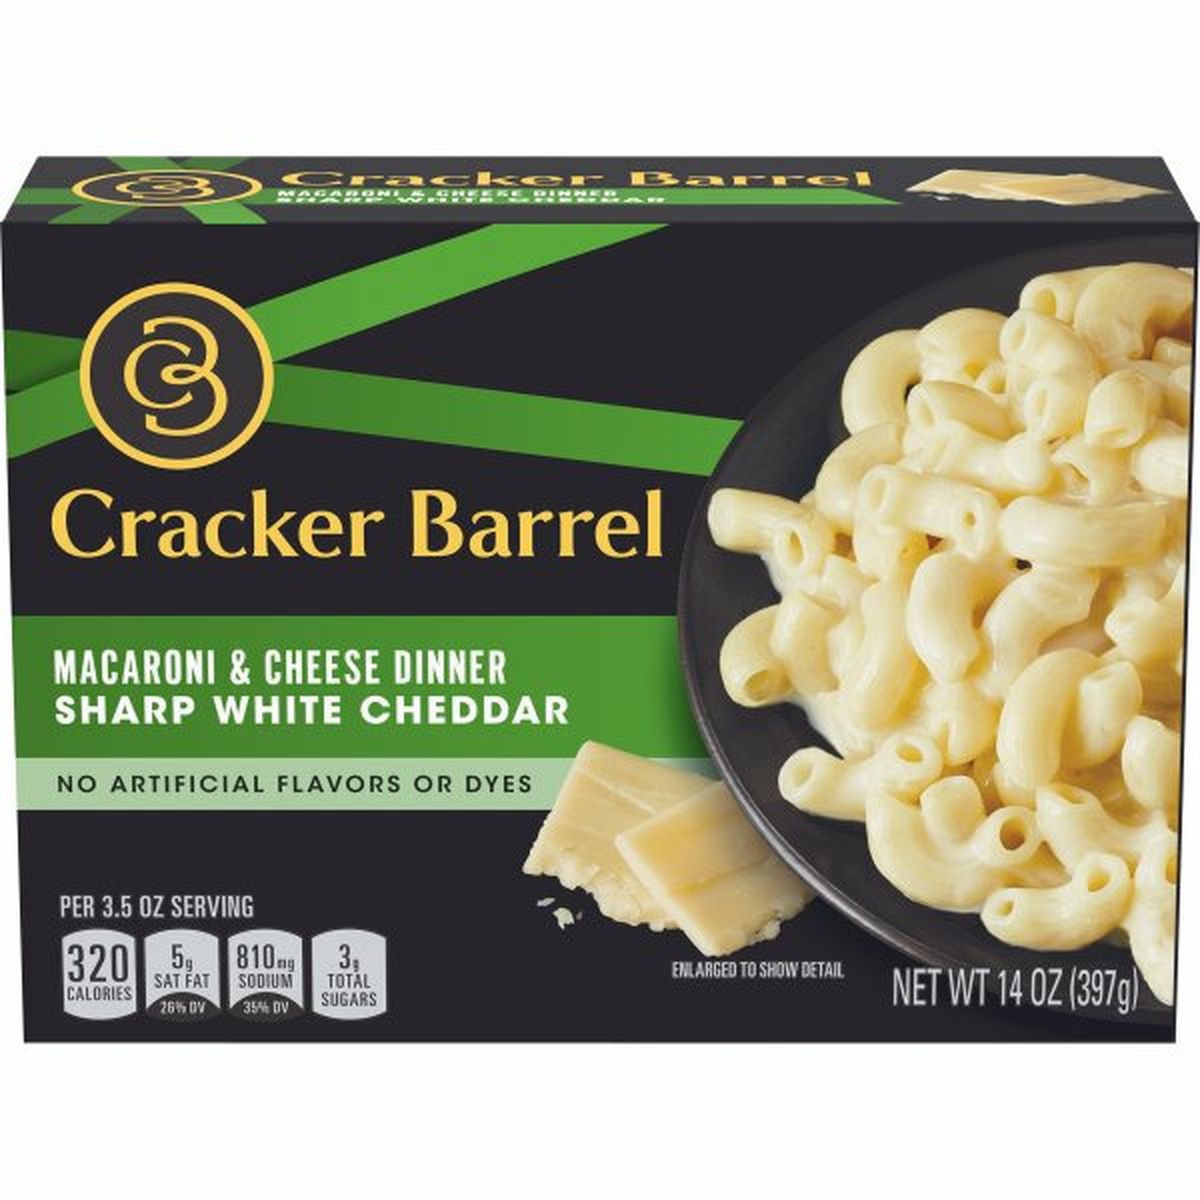 Calories in Cracker Barrel Sharp White Cheddar Macaroni and Cheese Dinner